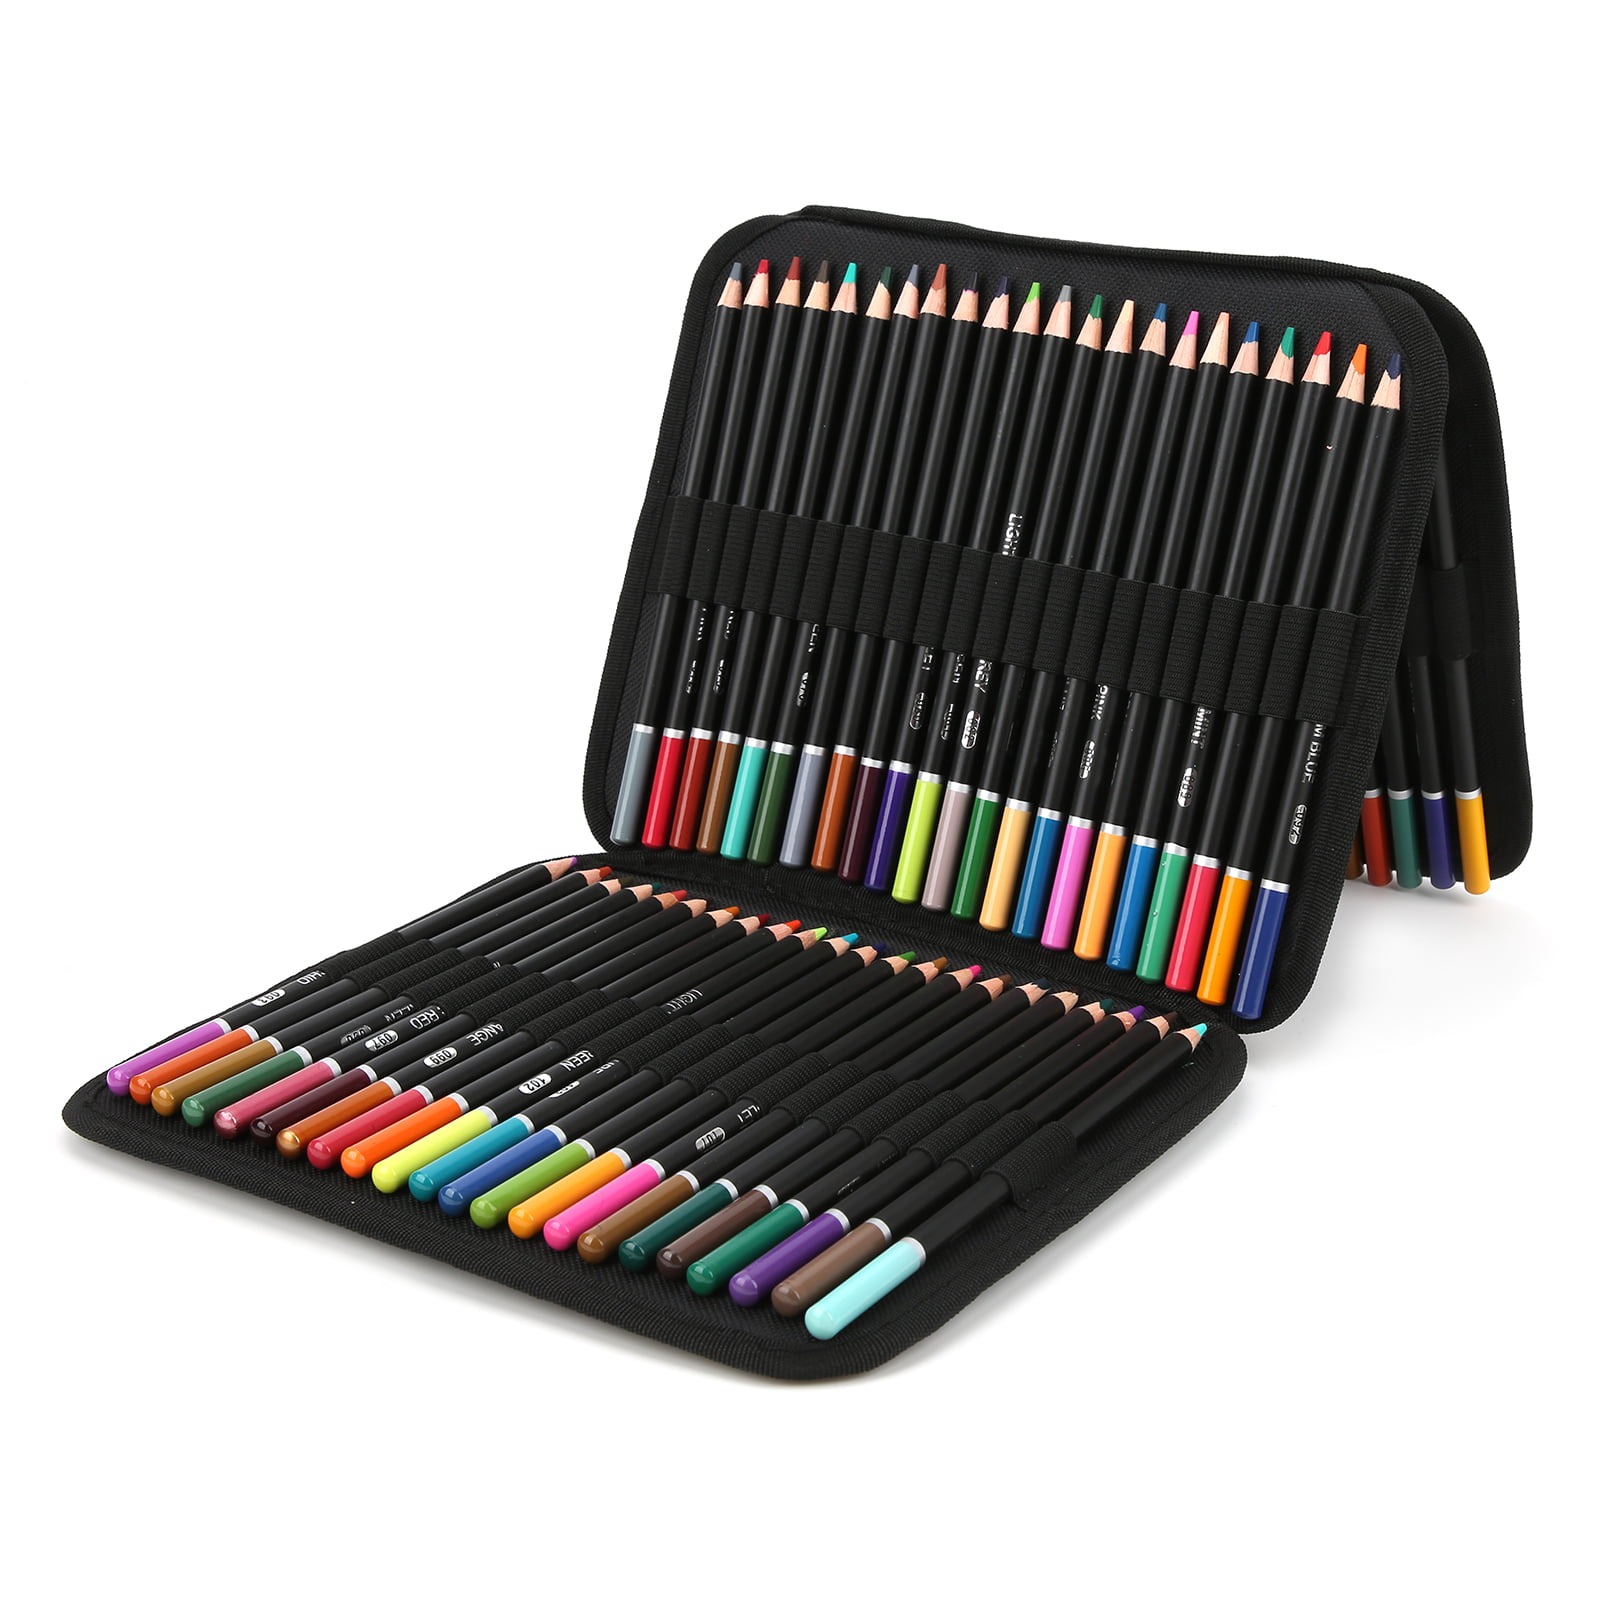 Weibo Colored Pencils, Premium Soft Core 12 Unique Colors No Duplicates Color Pencil Set for Adult and Kids Coloring Books, Artist Drawing, Crafting